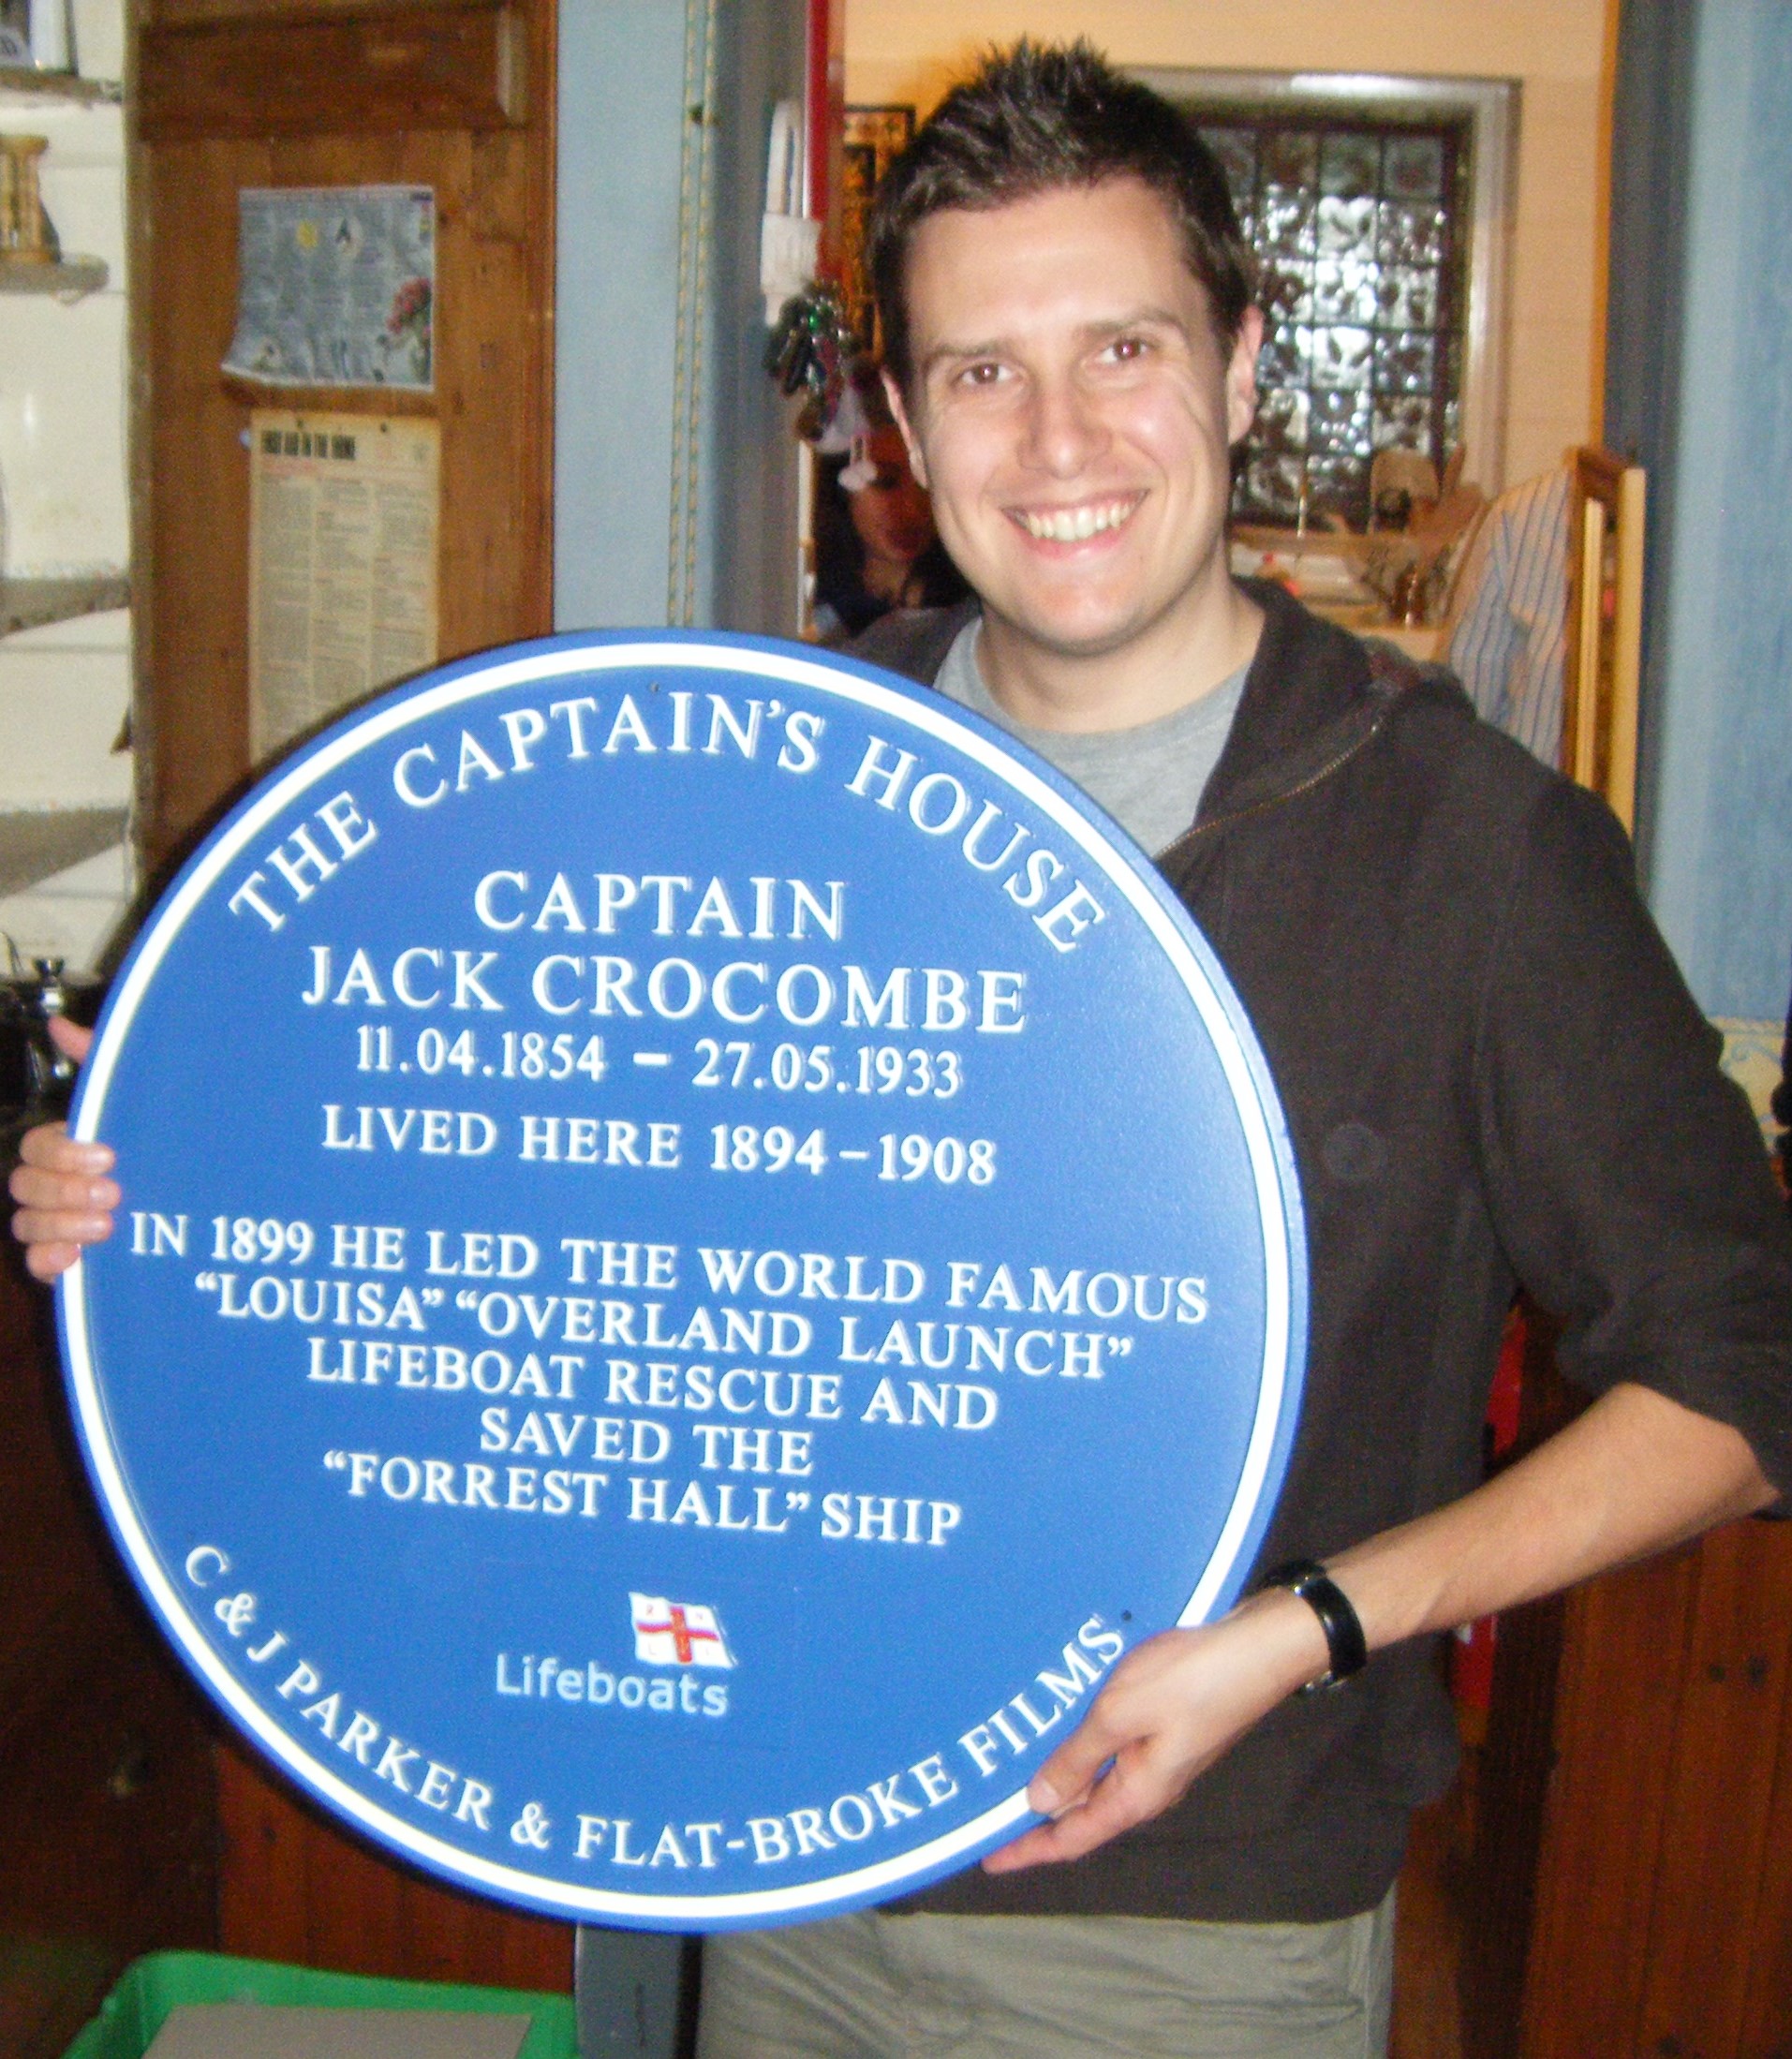 Louisa: A Winter's Tale screenwriter ADRIAN TYSON proudly holding a Blue Plaque erected at Jack Crocombe's house in October, 2010.